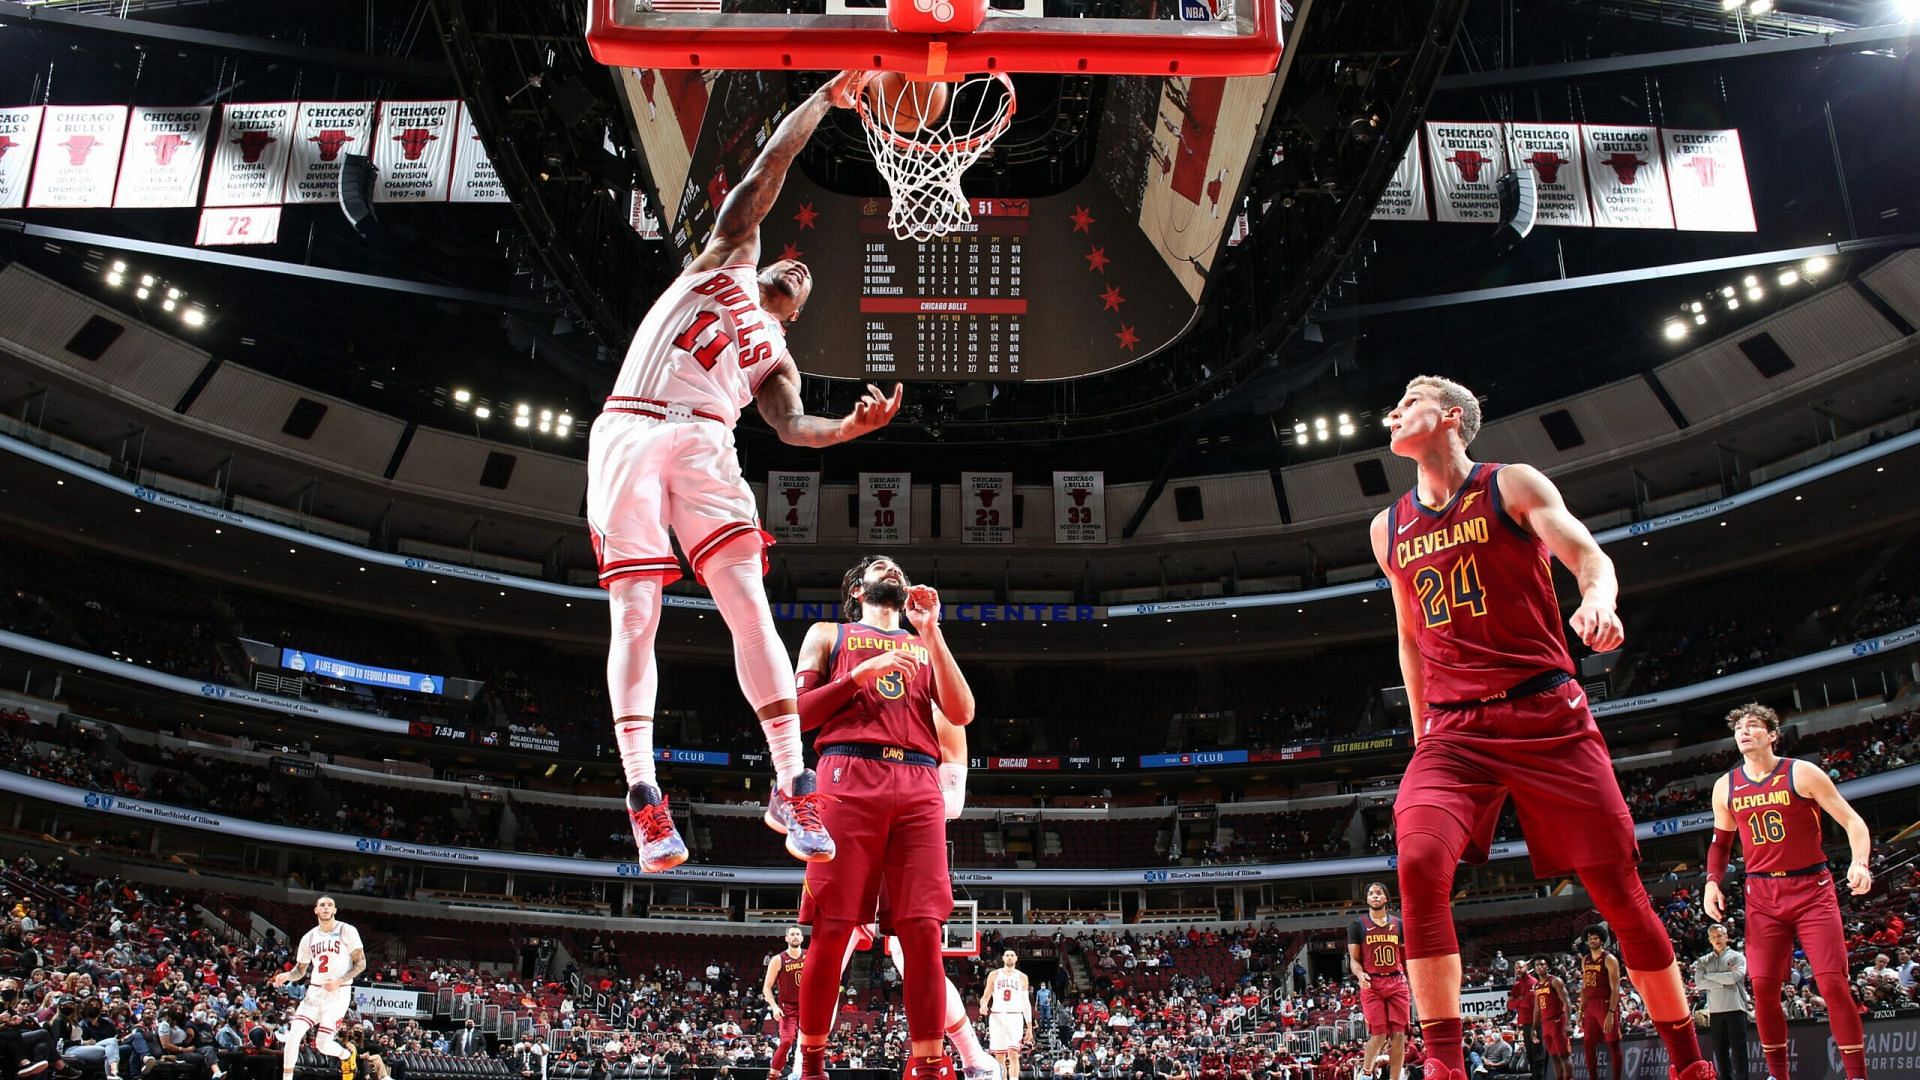 The Chicago Bulls will host the Cleveland Cavaliers on January 19th [Source: NBA.com]